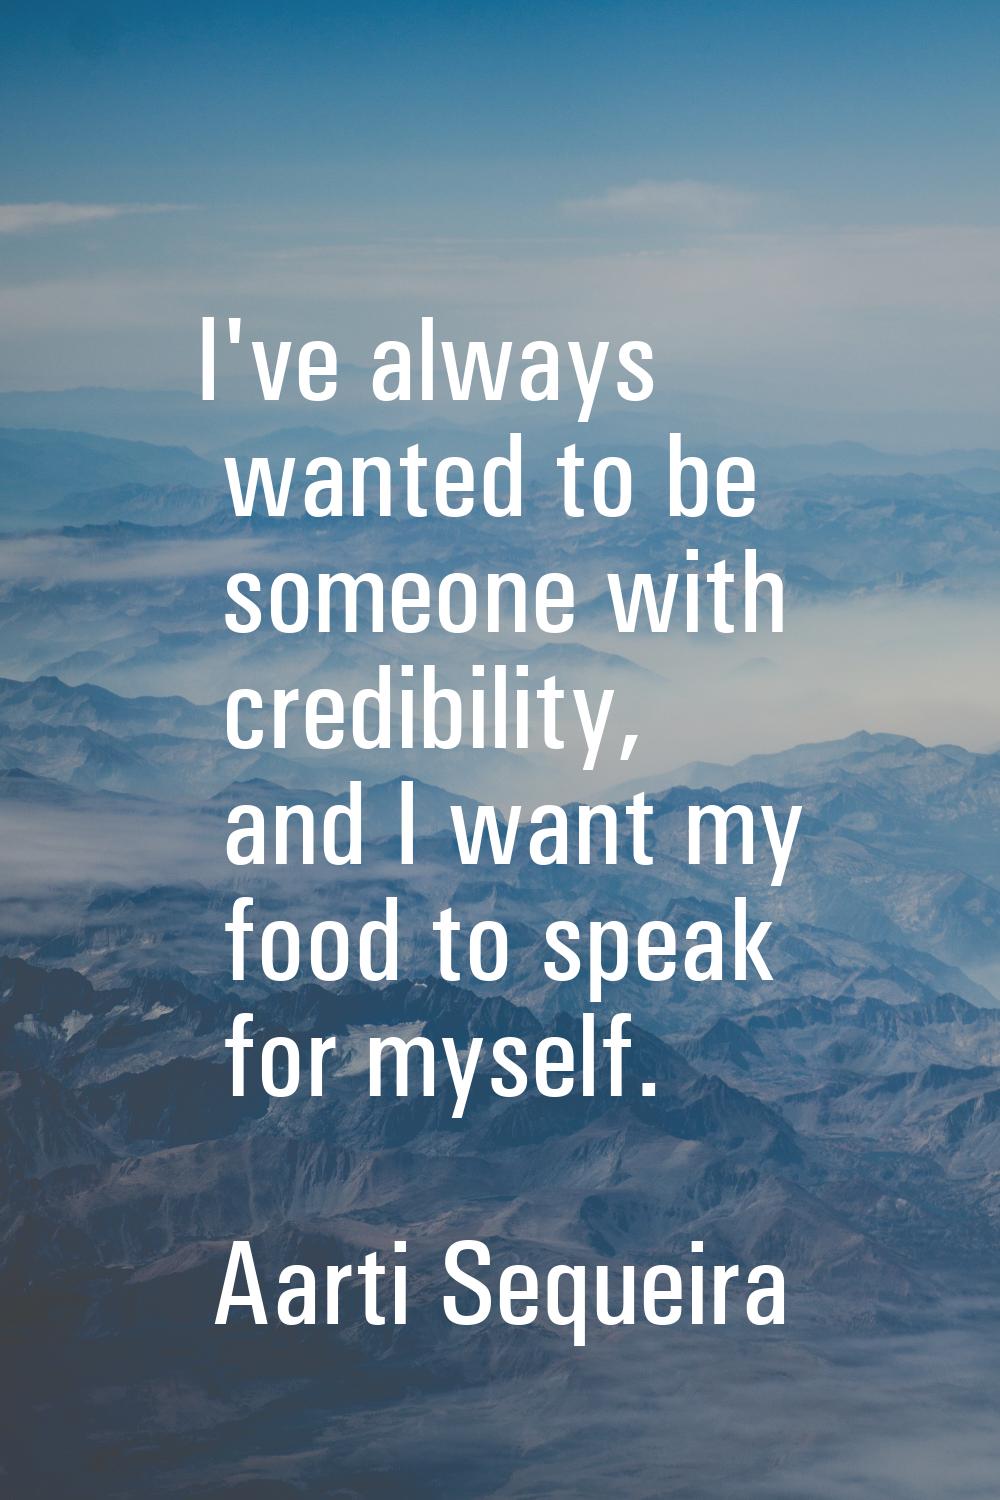 I've always wanted to be someone with credibility, and I want my food to speak for myself.